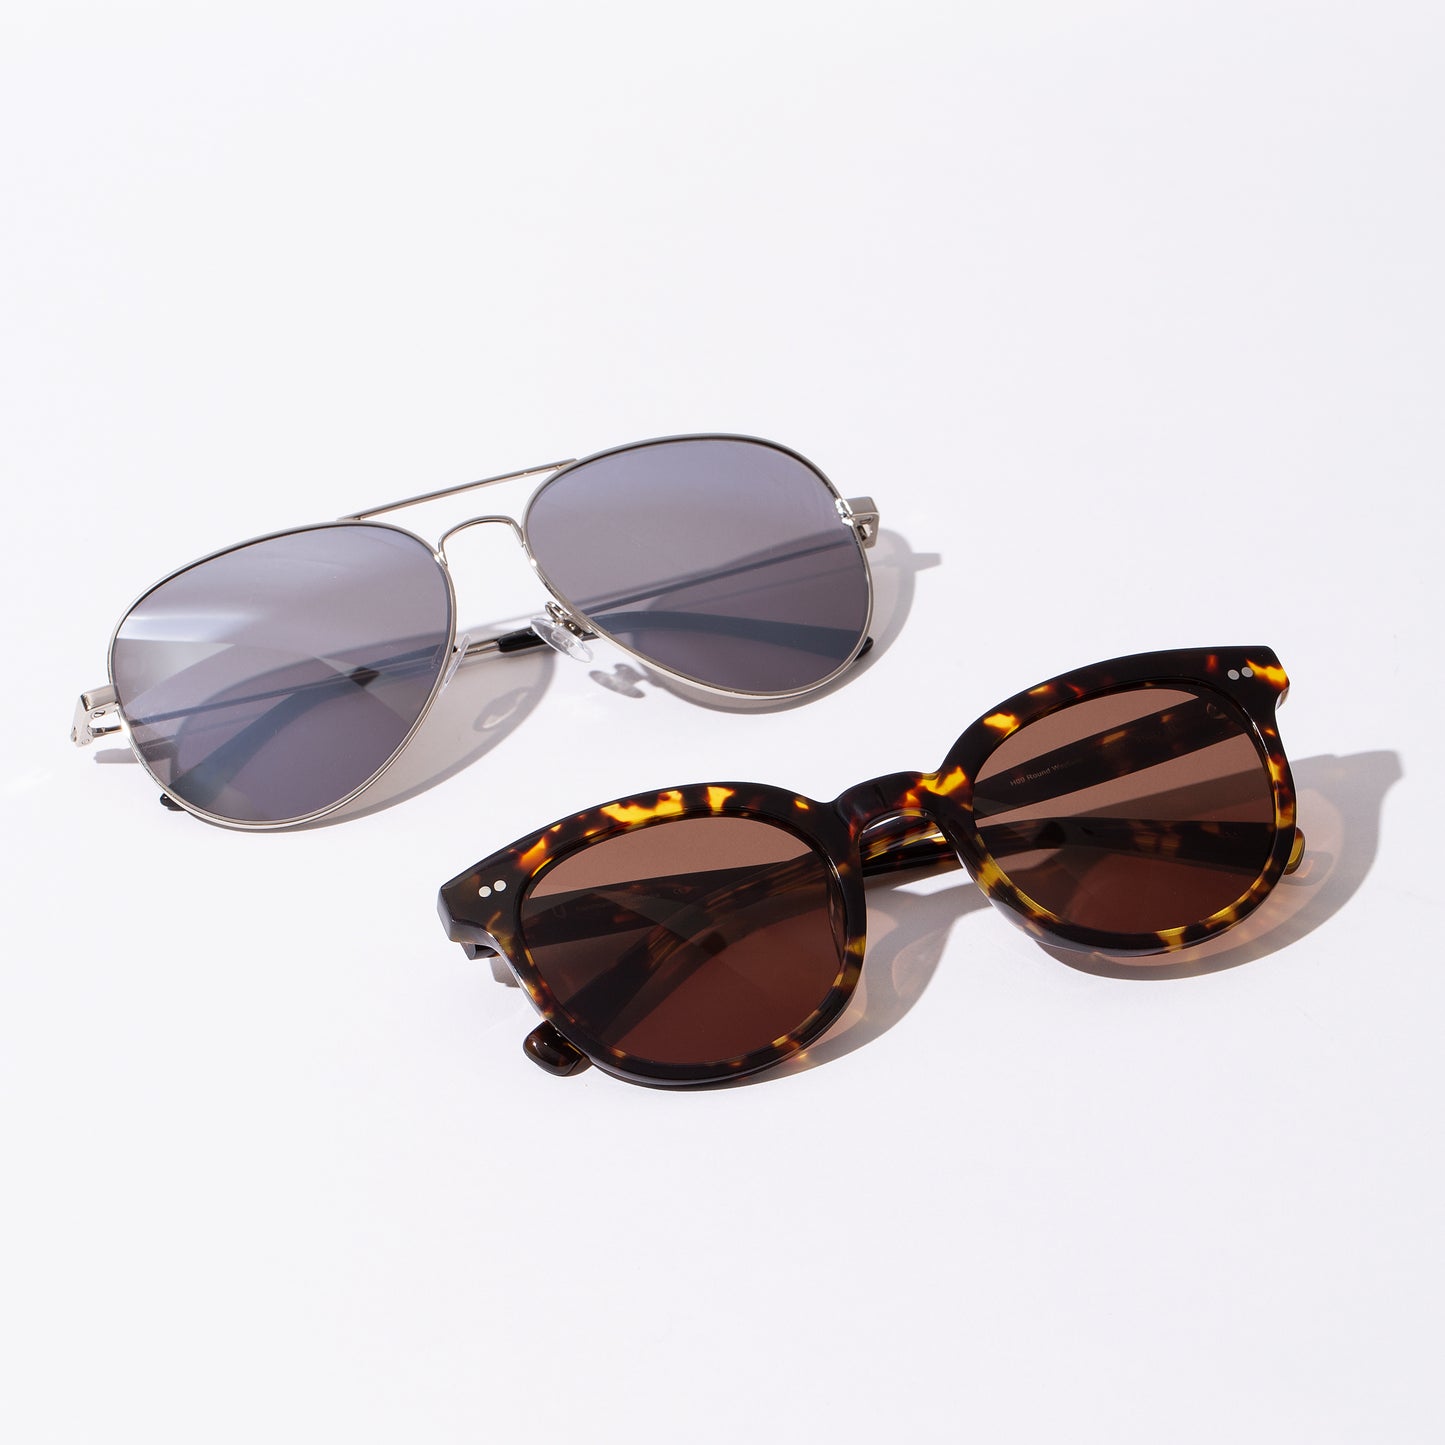 Double the Shade Sunglasses Duo | Product Image | Uncommon James